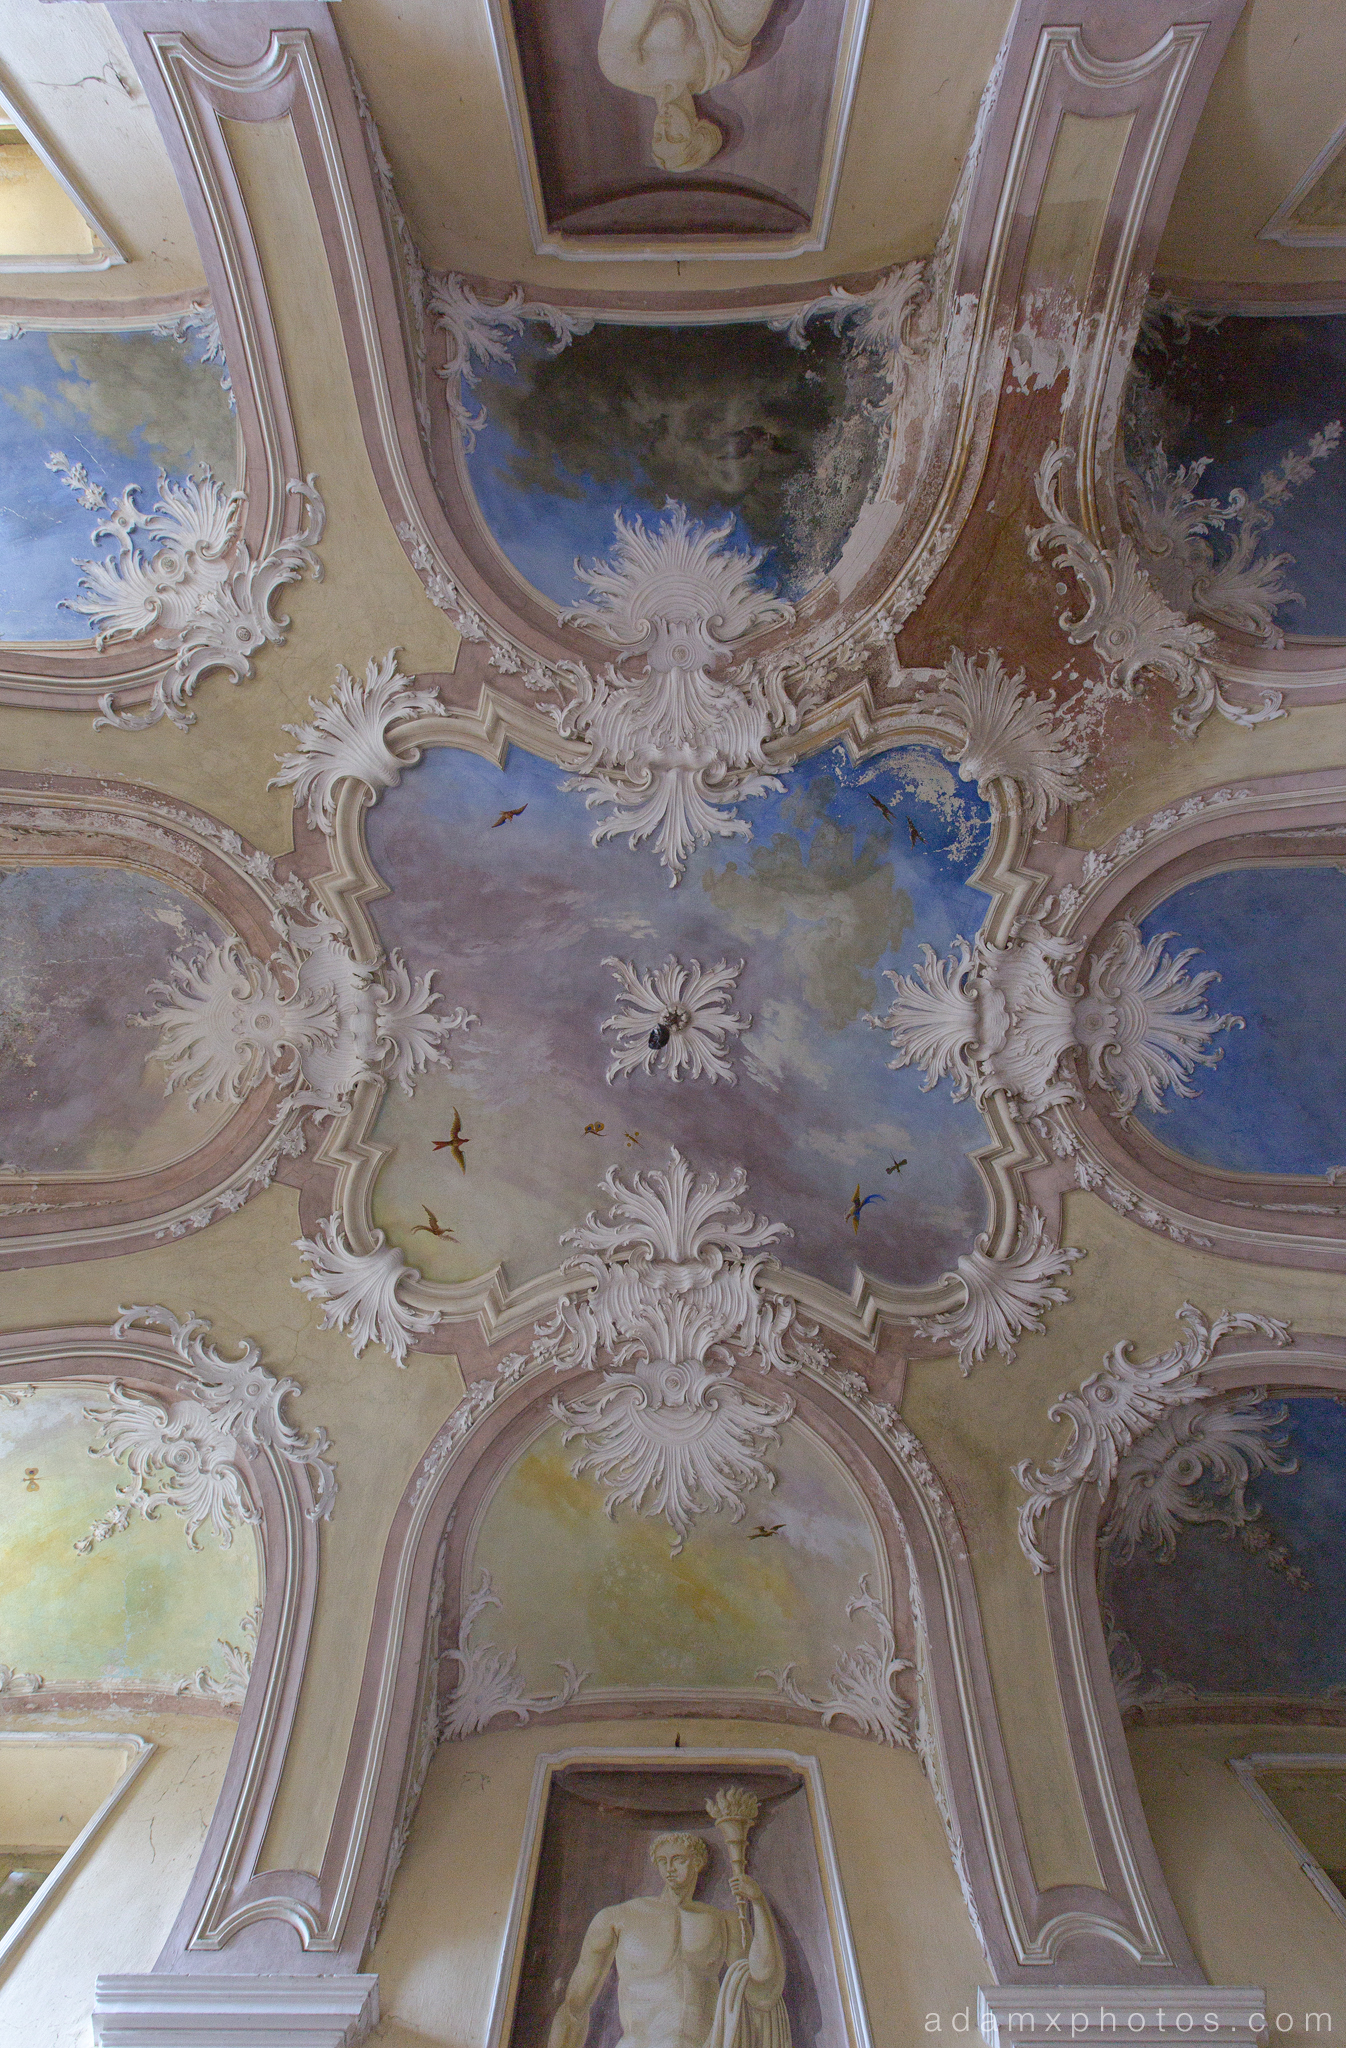 Villa SG castle Urbex Adam X Urban Exploration ceiling hall fresco painted ceiling rose pictures murals photo photos report decay detail UE abandoned derelict unused empty disused decay decayed decaying grimy grime